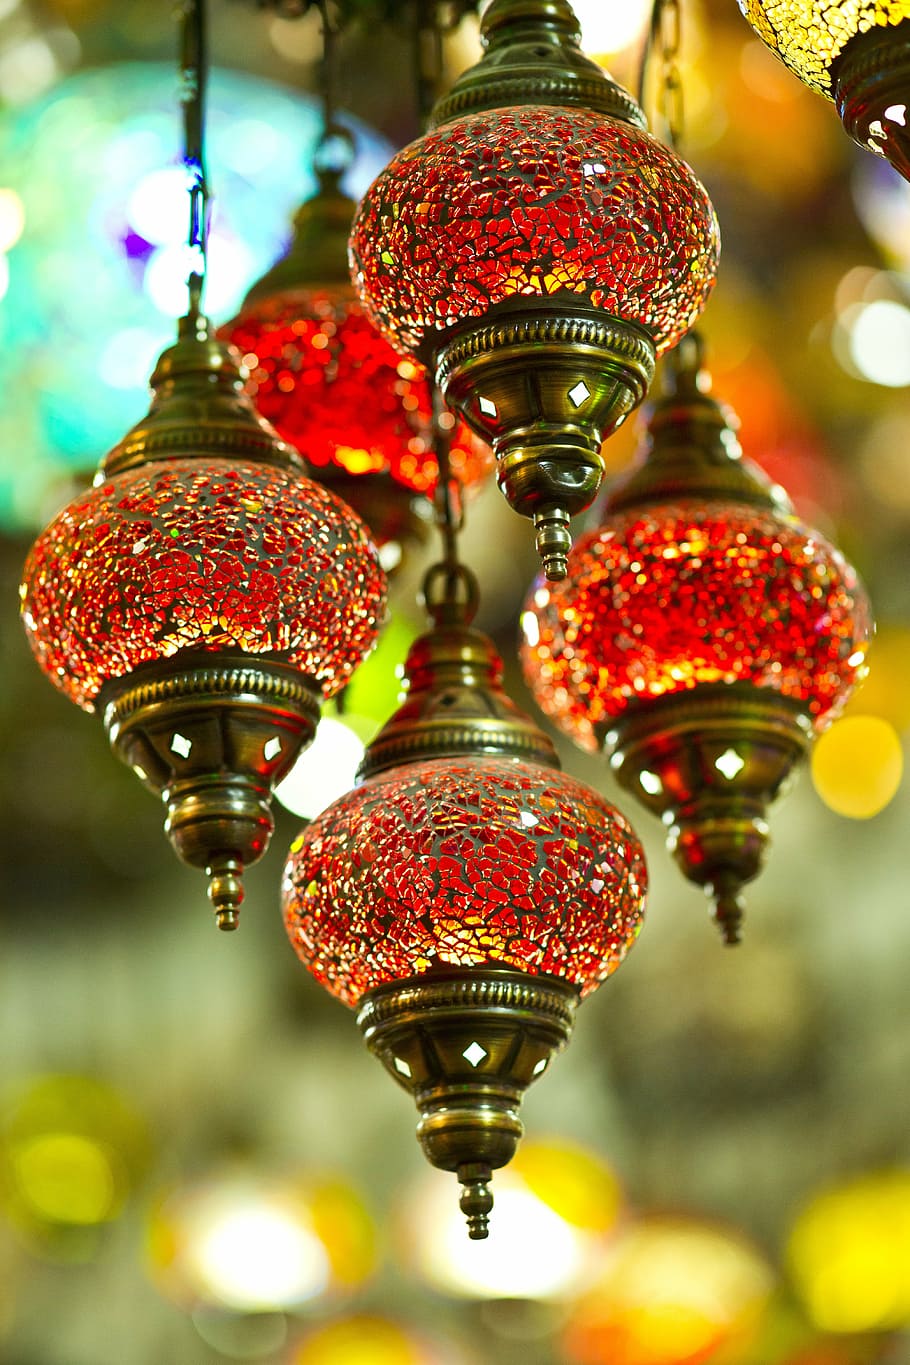 several pendant lamps, chandelier, lamp, red, istanbul, light, souvenir, turkey, hanging, middle east